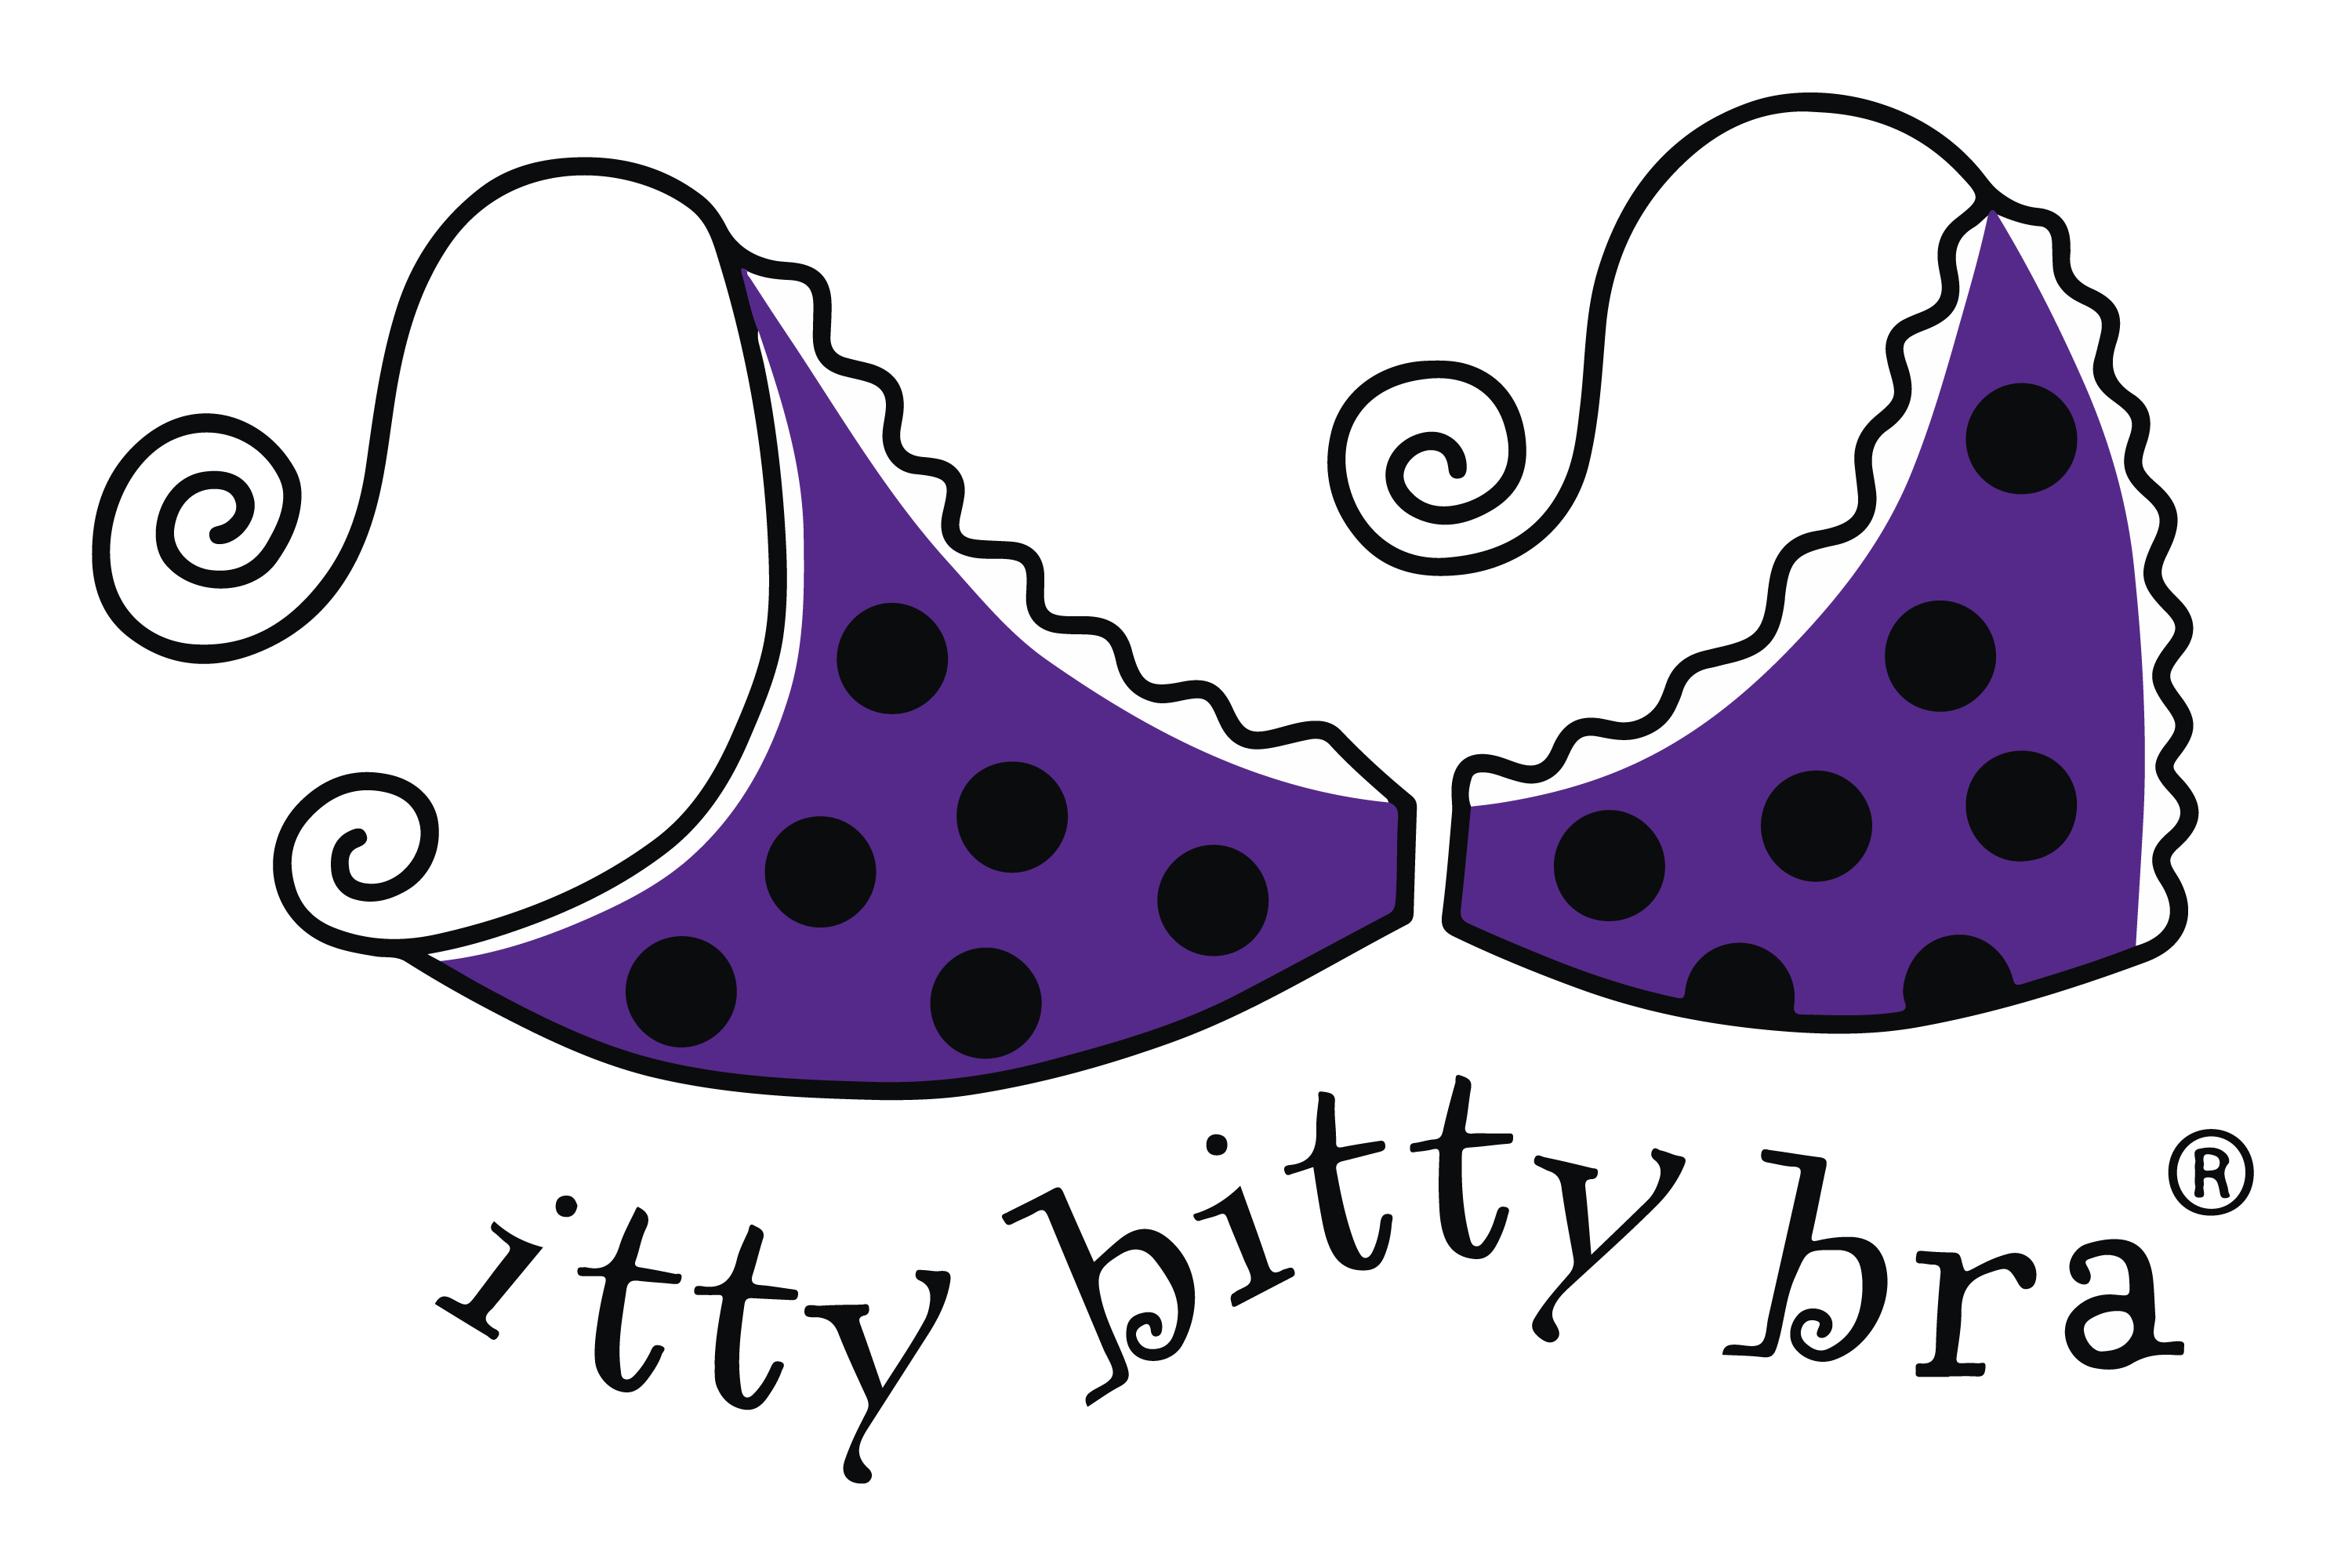 The bra guide for us itty bitty chest girlies 🤎 @Pepper #bestbras